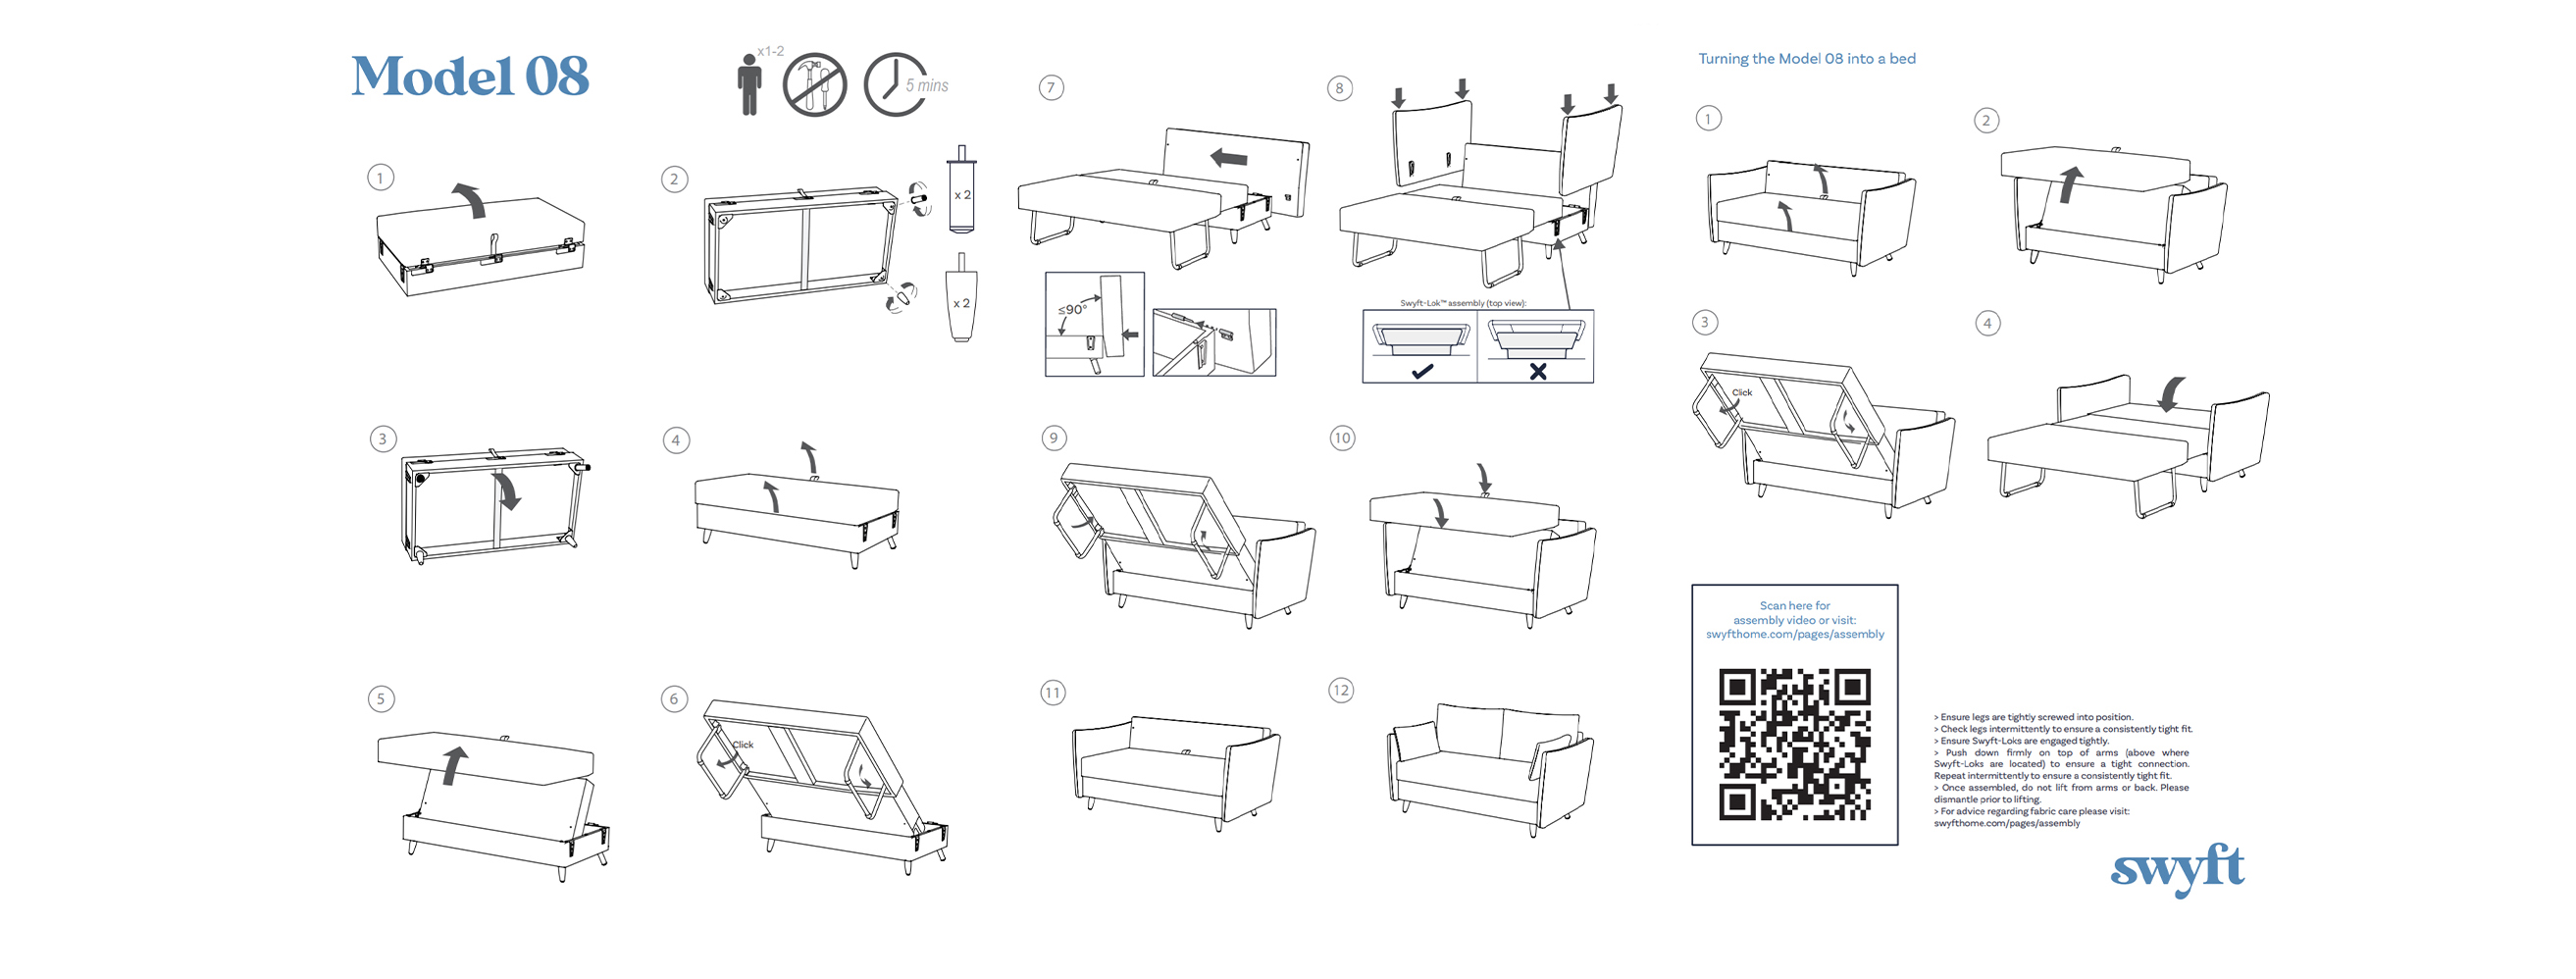 Assembly sofa bed